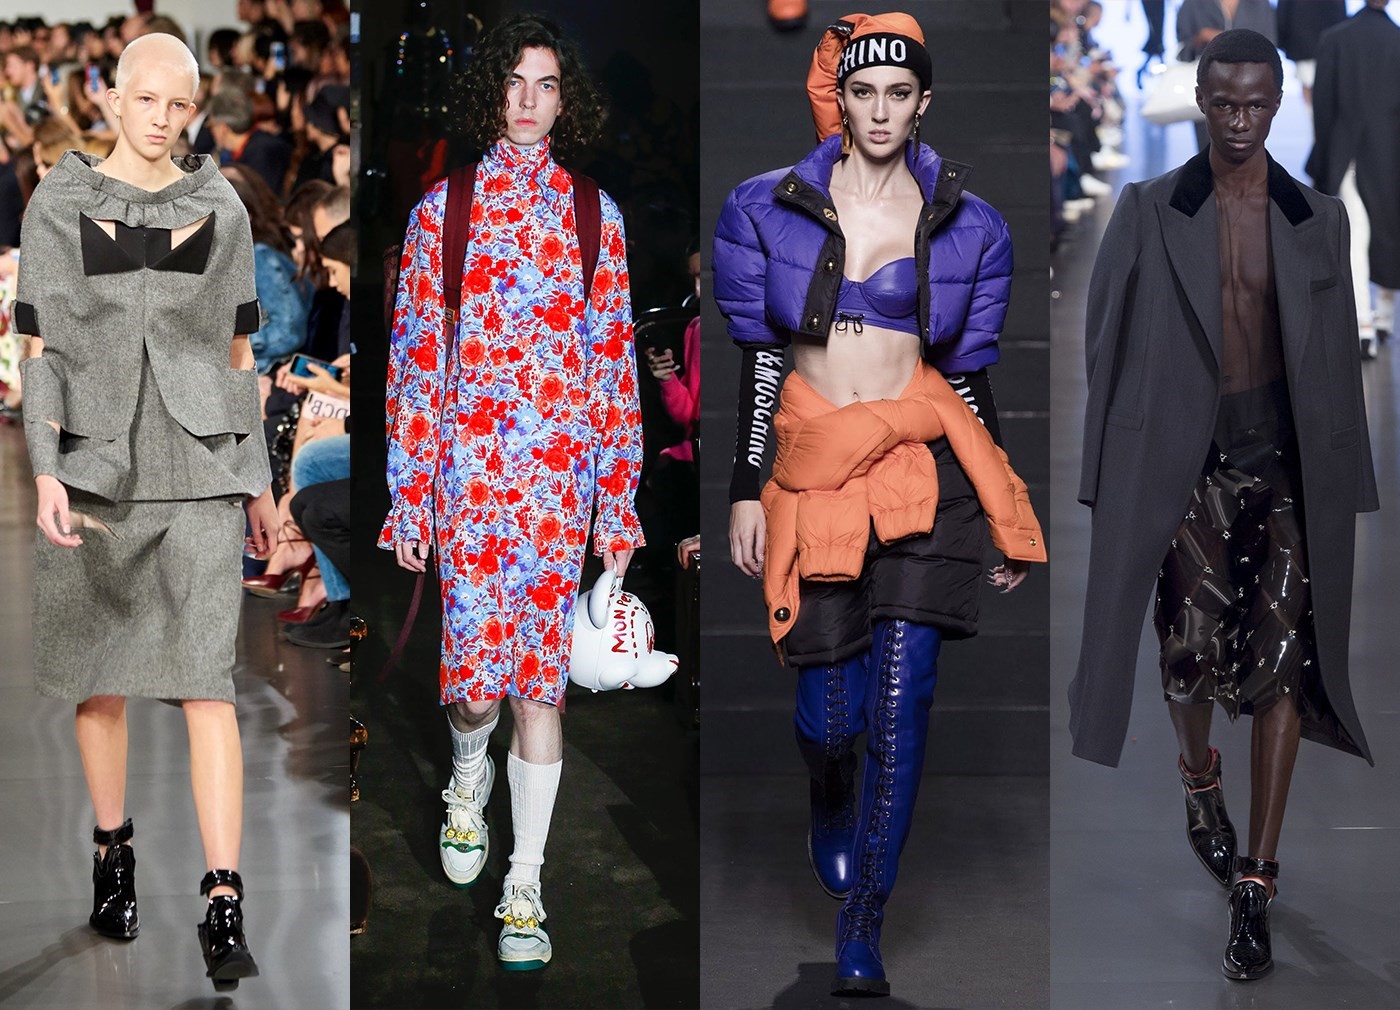 Trans LGBTQ visibility in the fashion industry 3